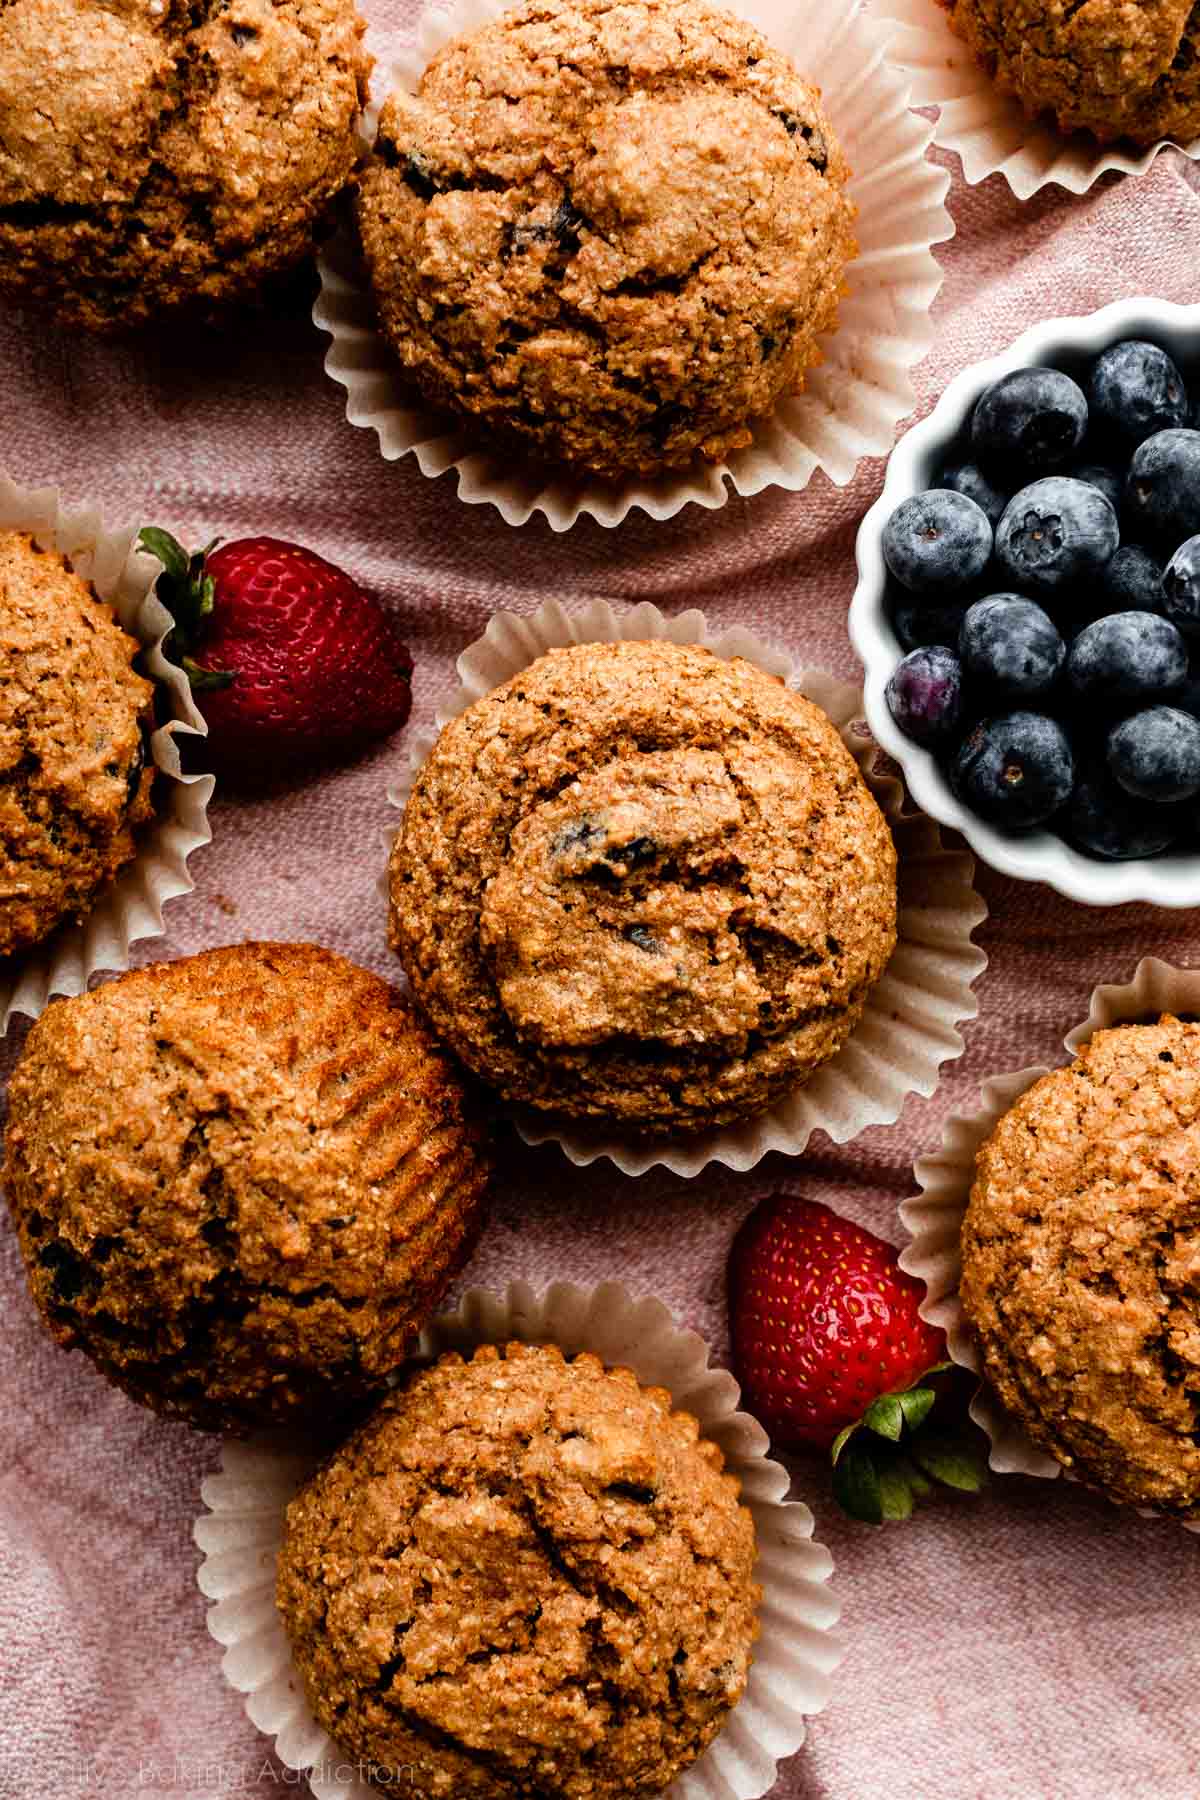 bran muffins with strawberries and bowl of blueberries next to them.